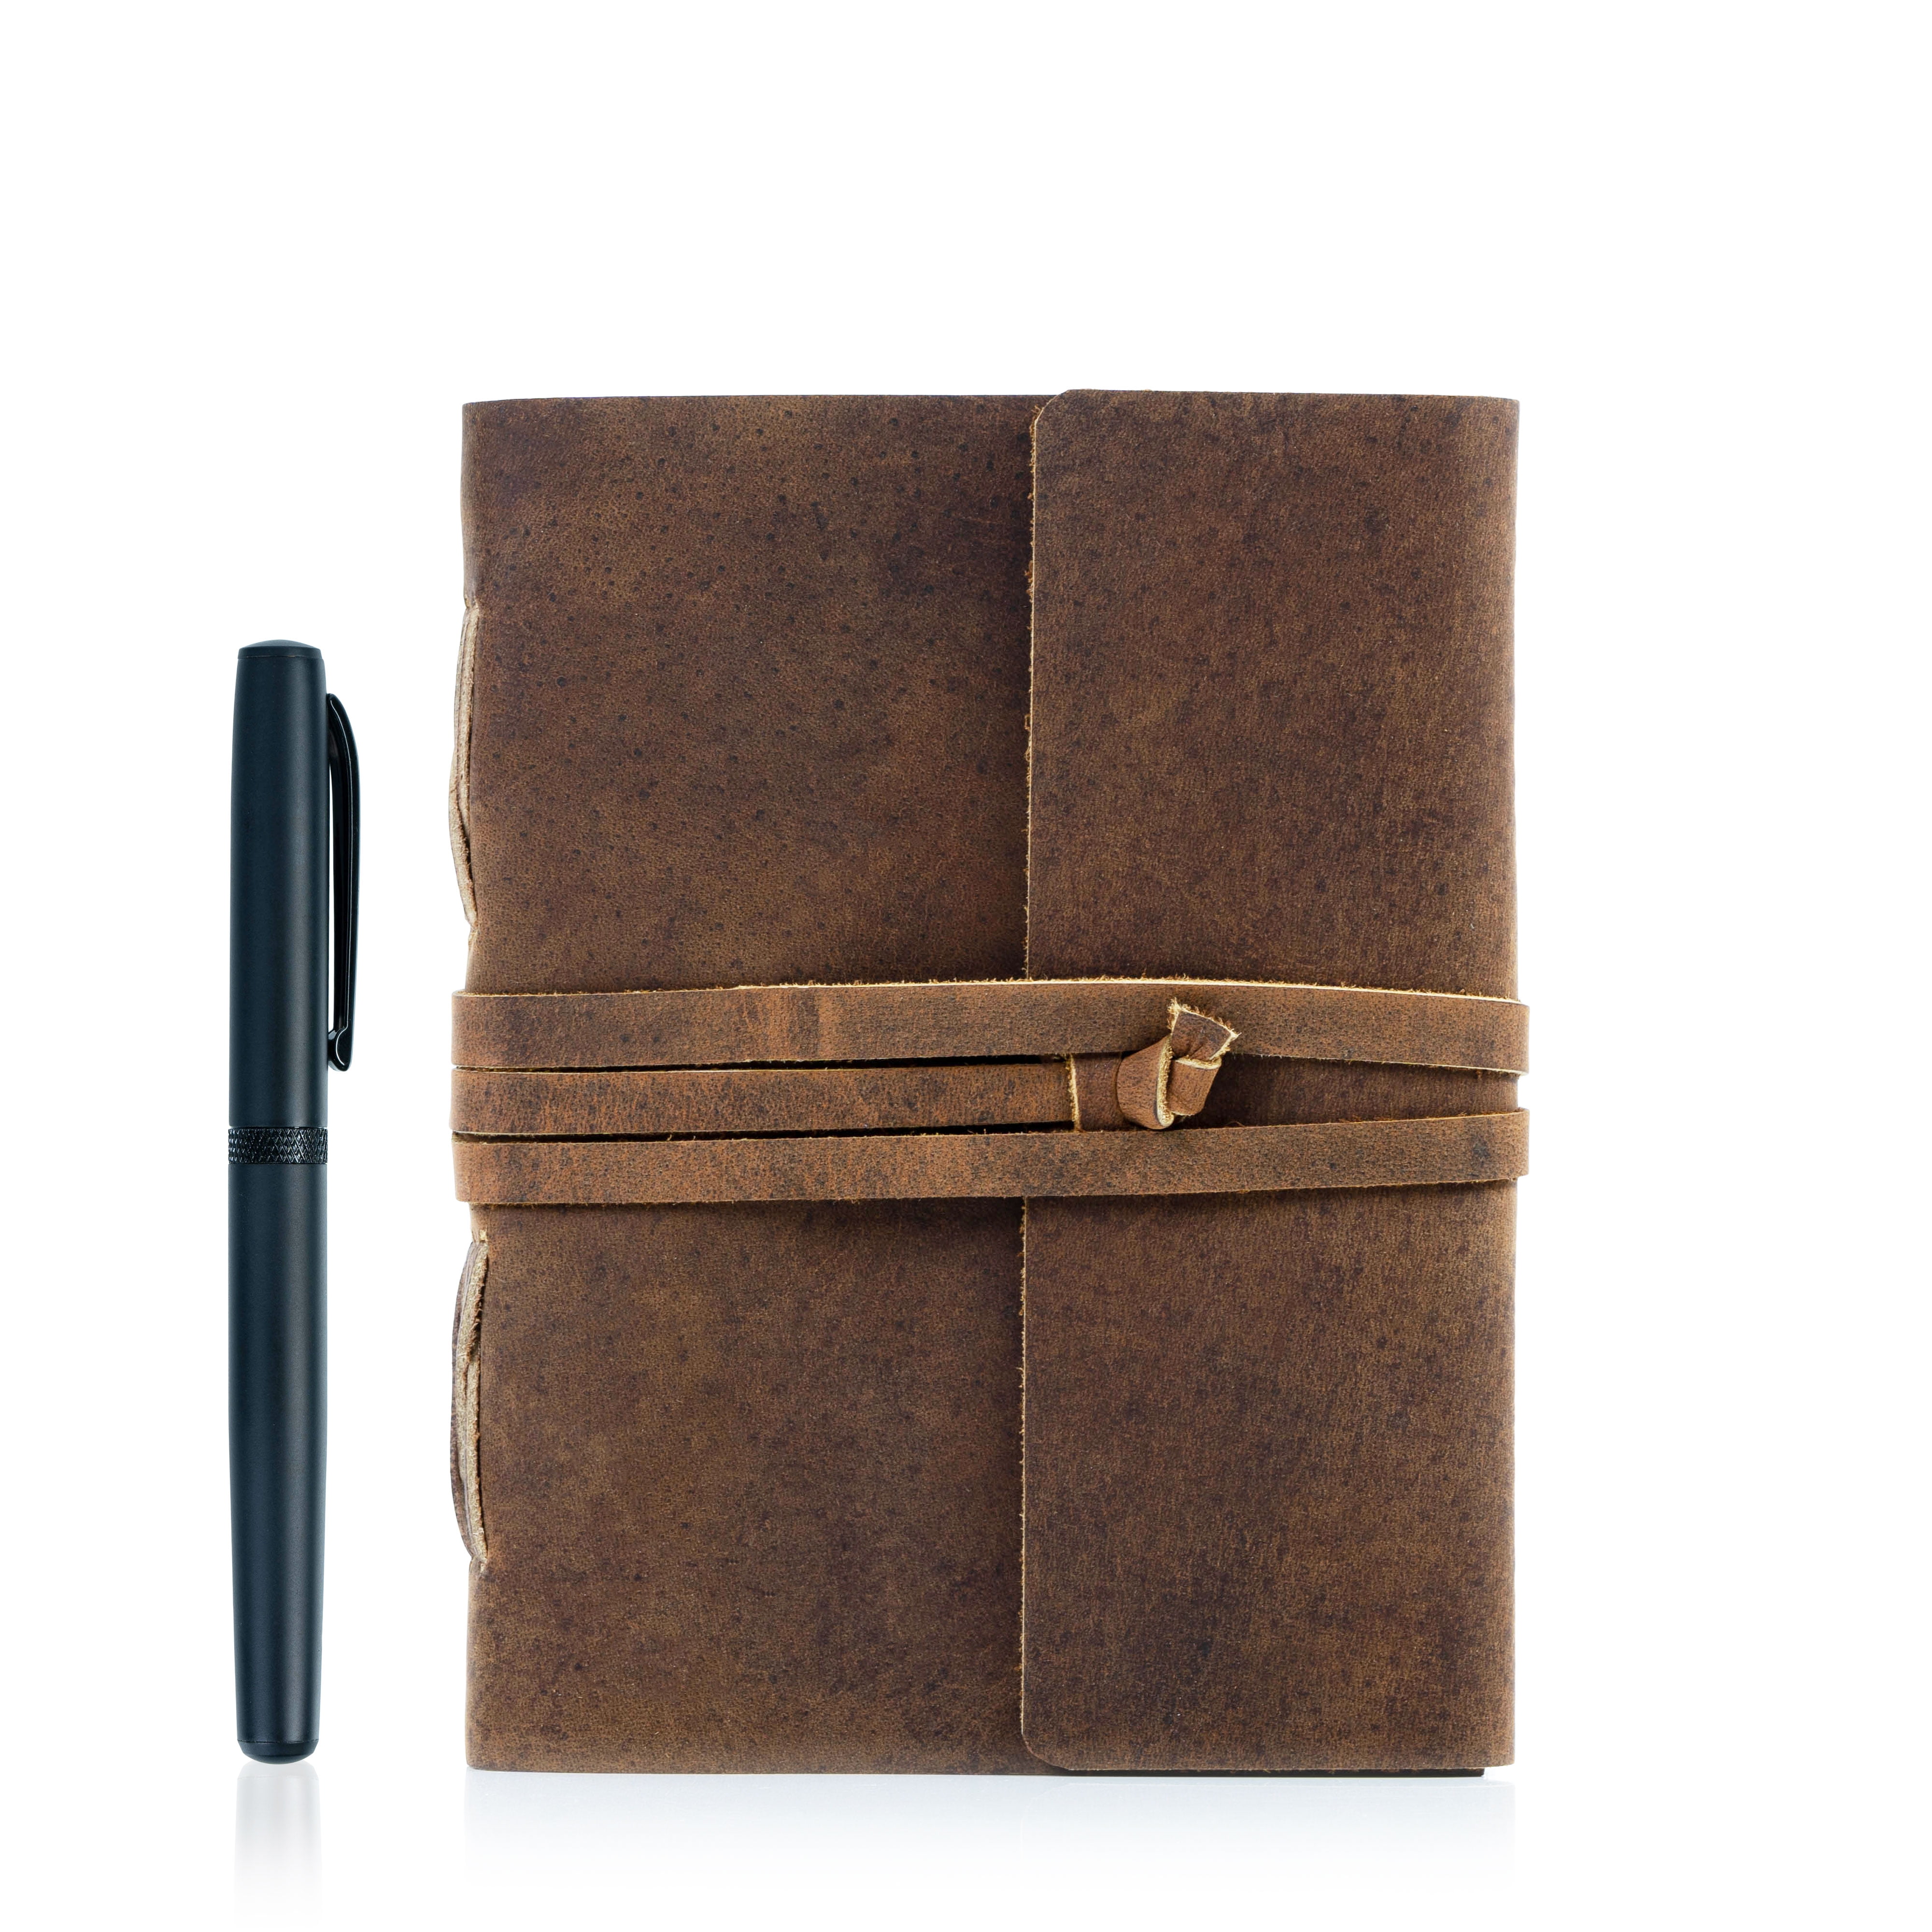 Leather Journal Lined Paper With Luxury, Leather Bound Lined Journal